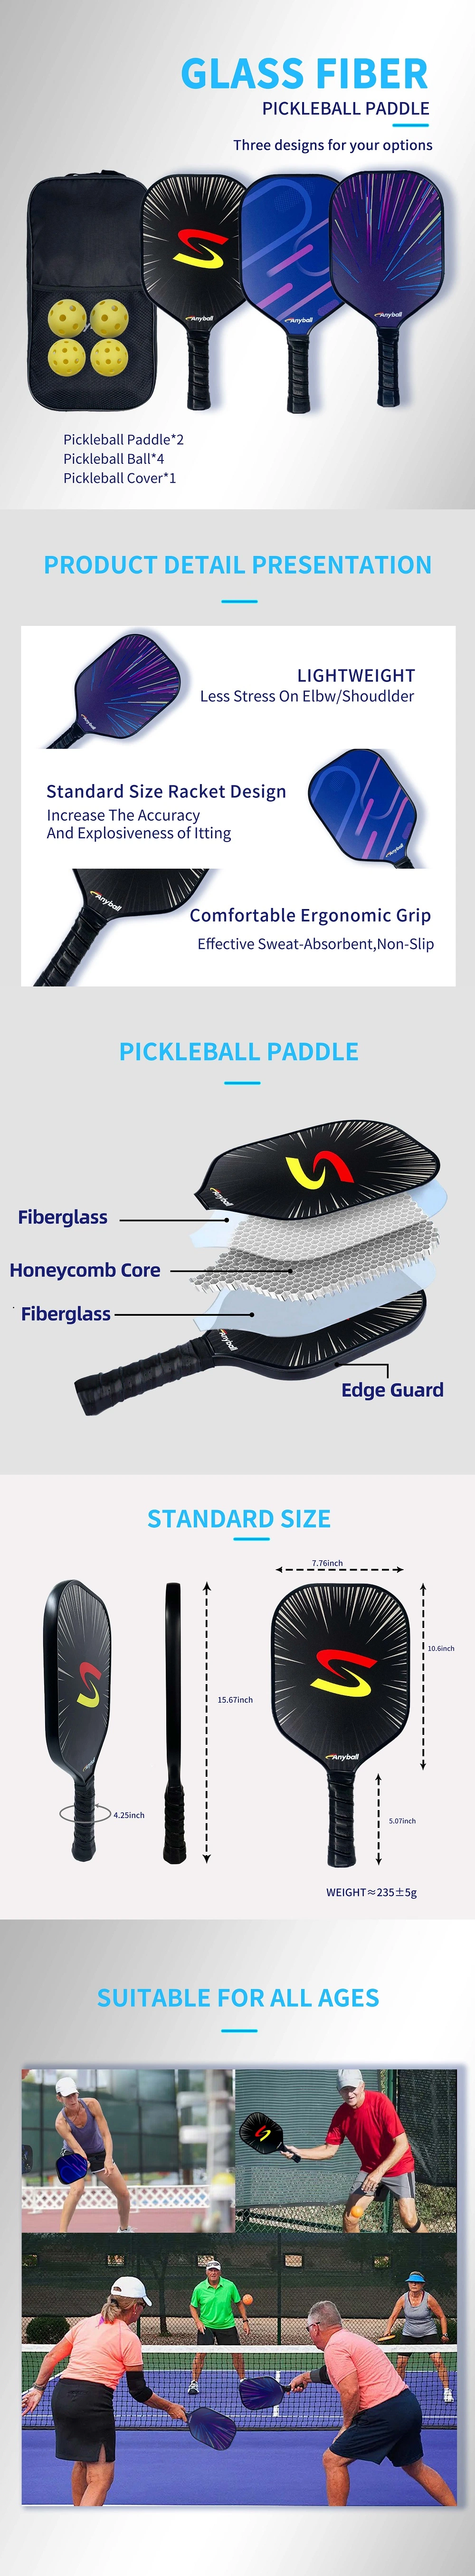 Top Quality Pickleball Paddle Anyball Pickleball Paddles Set of 2 Paddles and 4 Balls Indoor and Outdoor Star